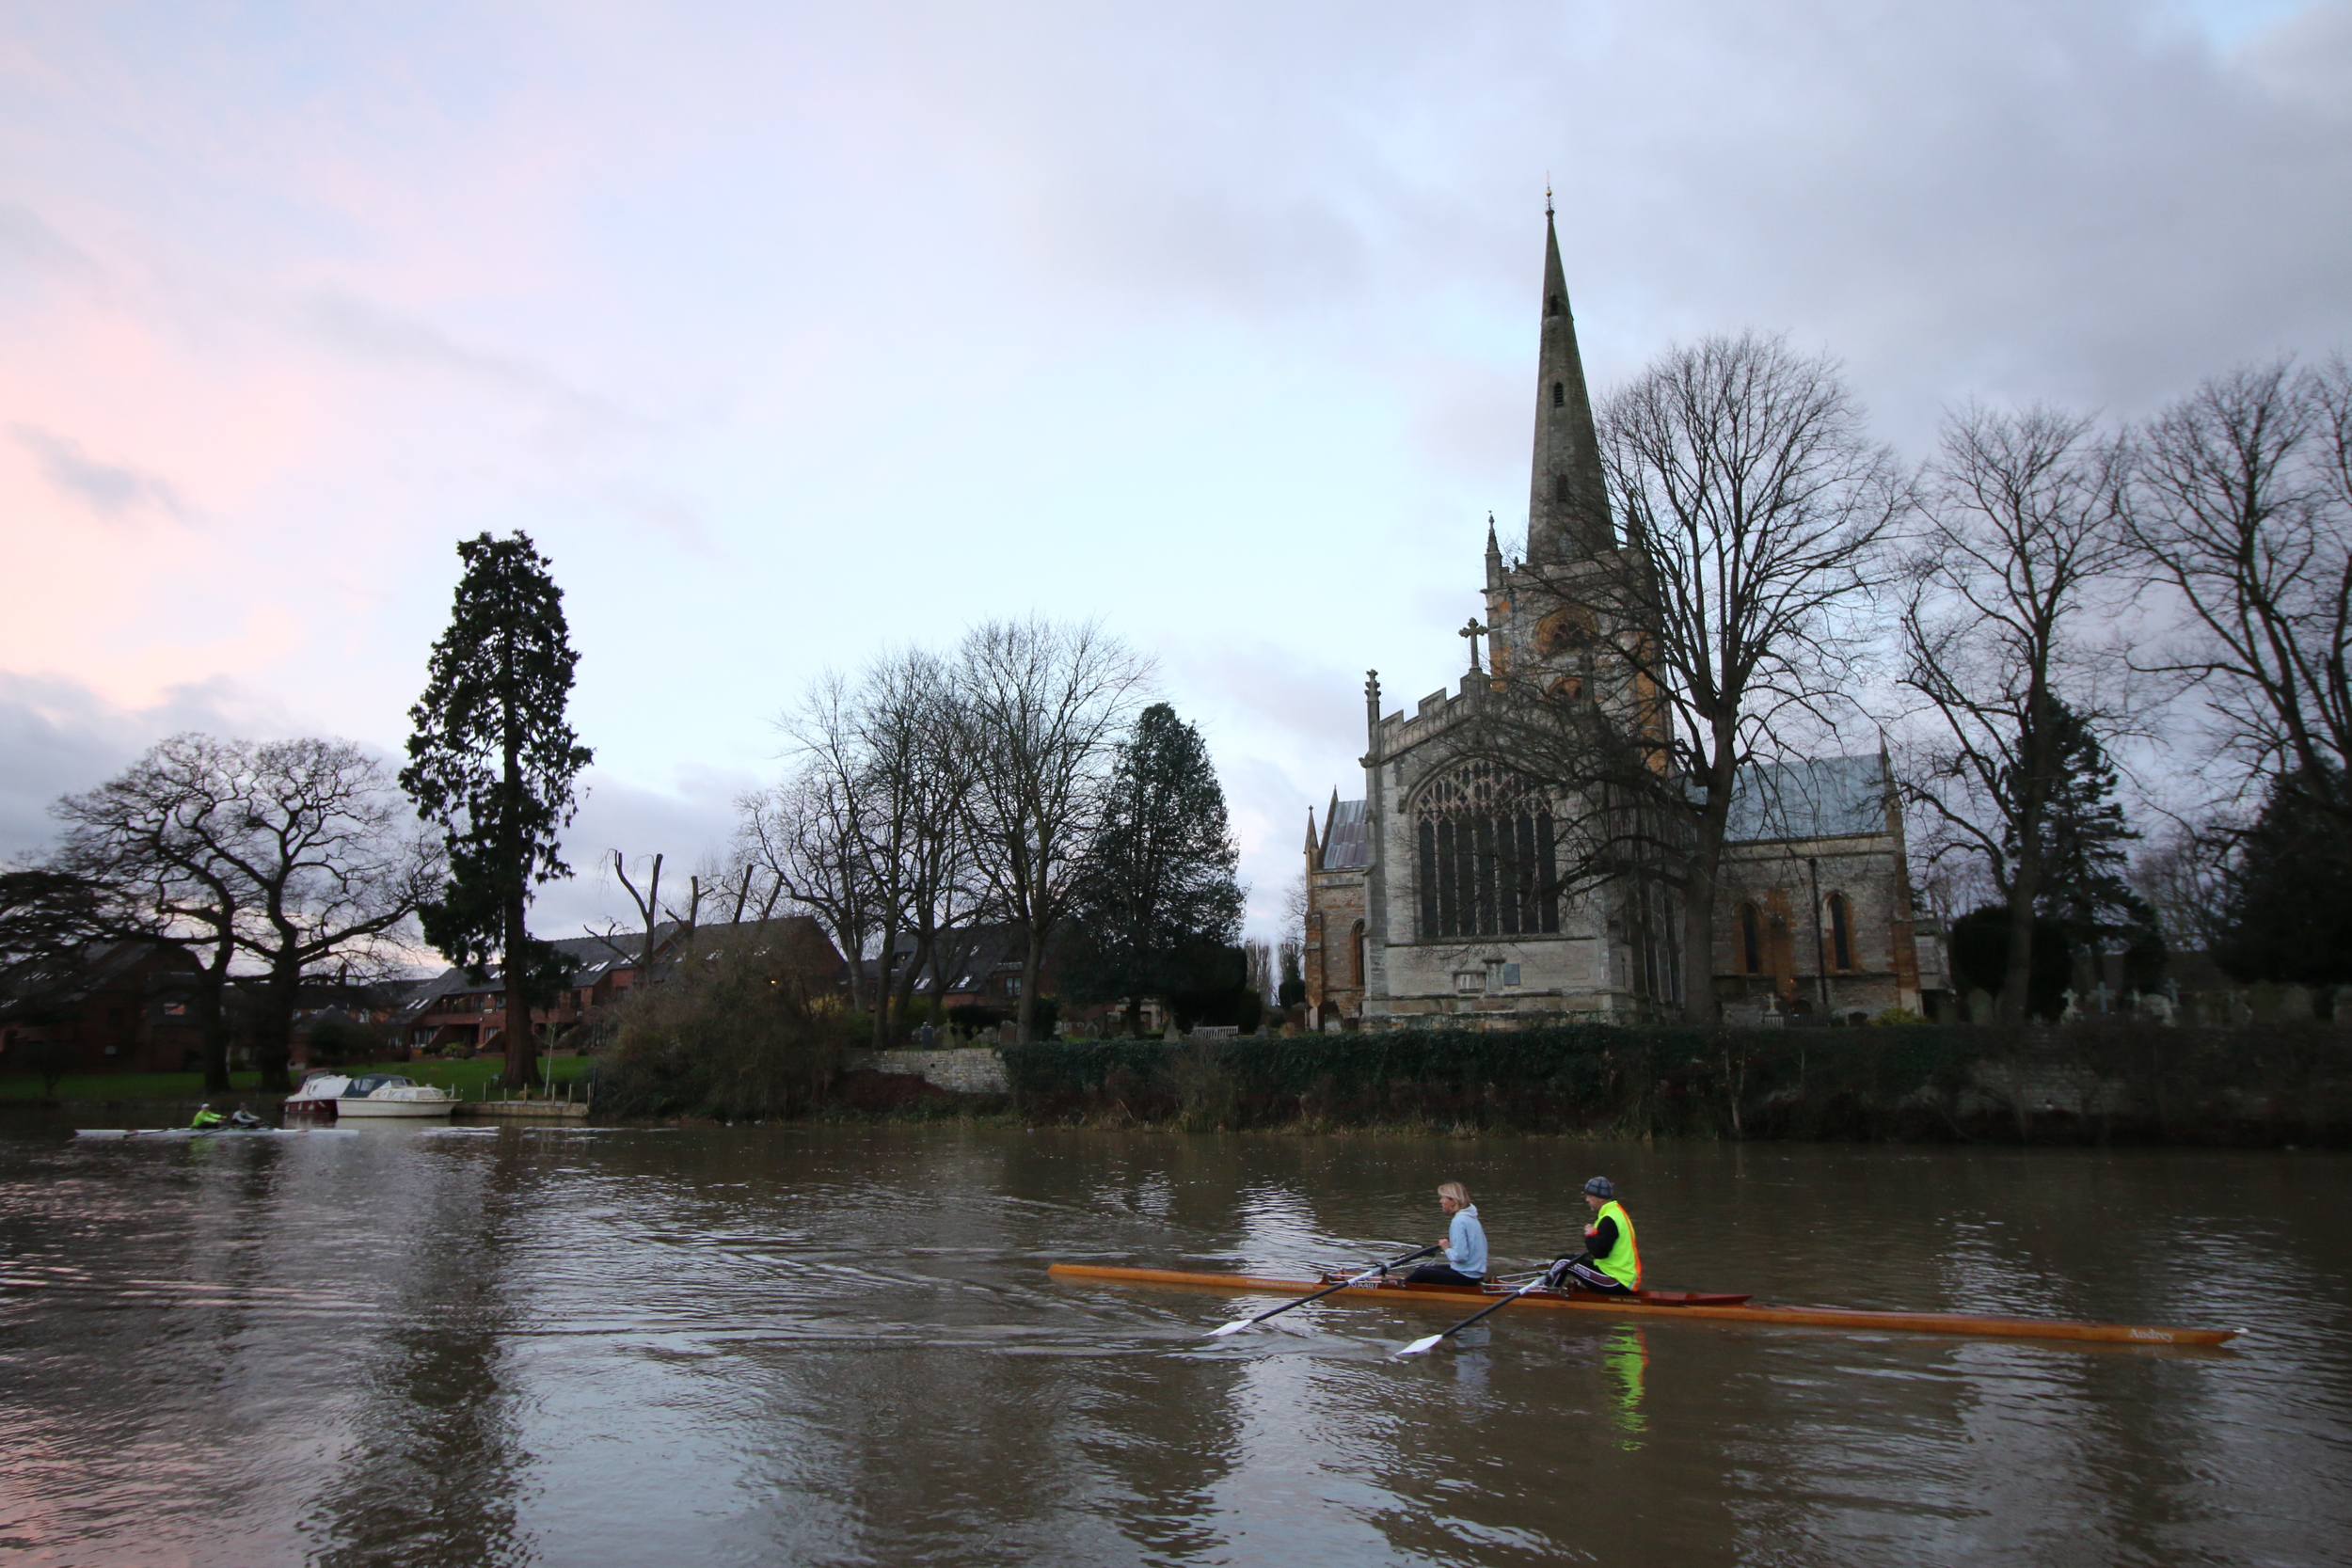 Rowers at dawn, Stratford-upon-Avon: they're a keen bunch.